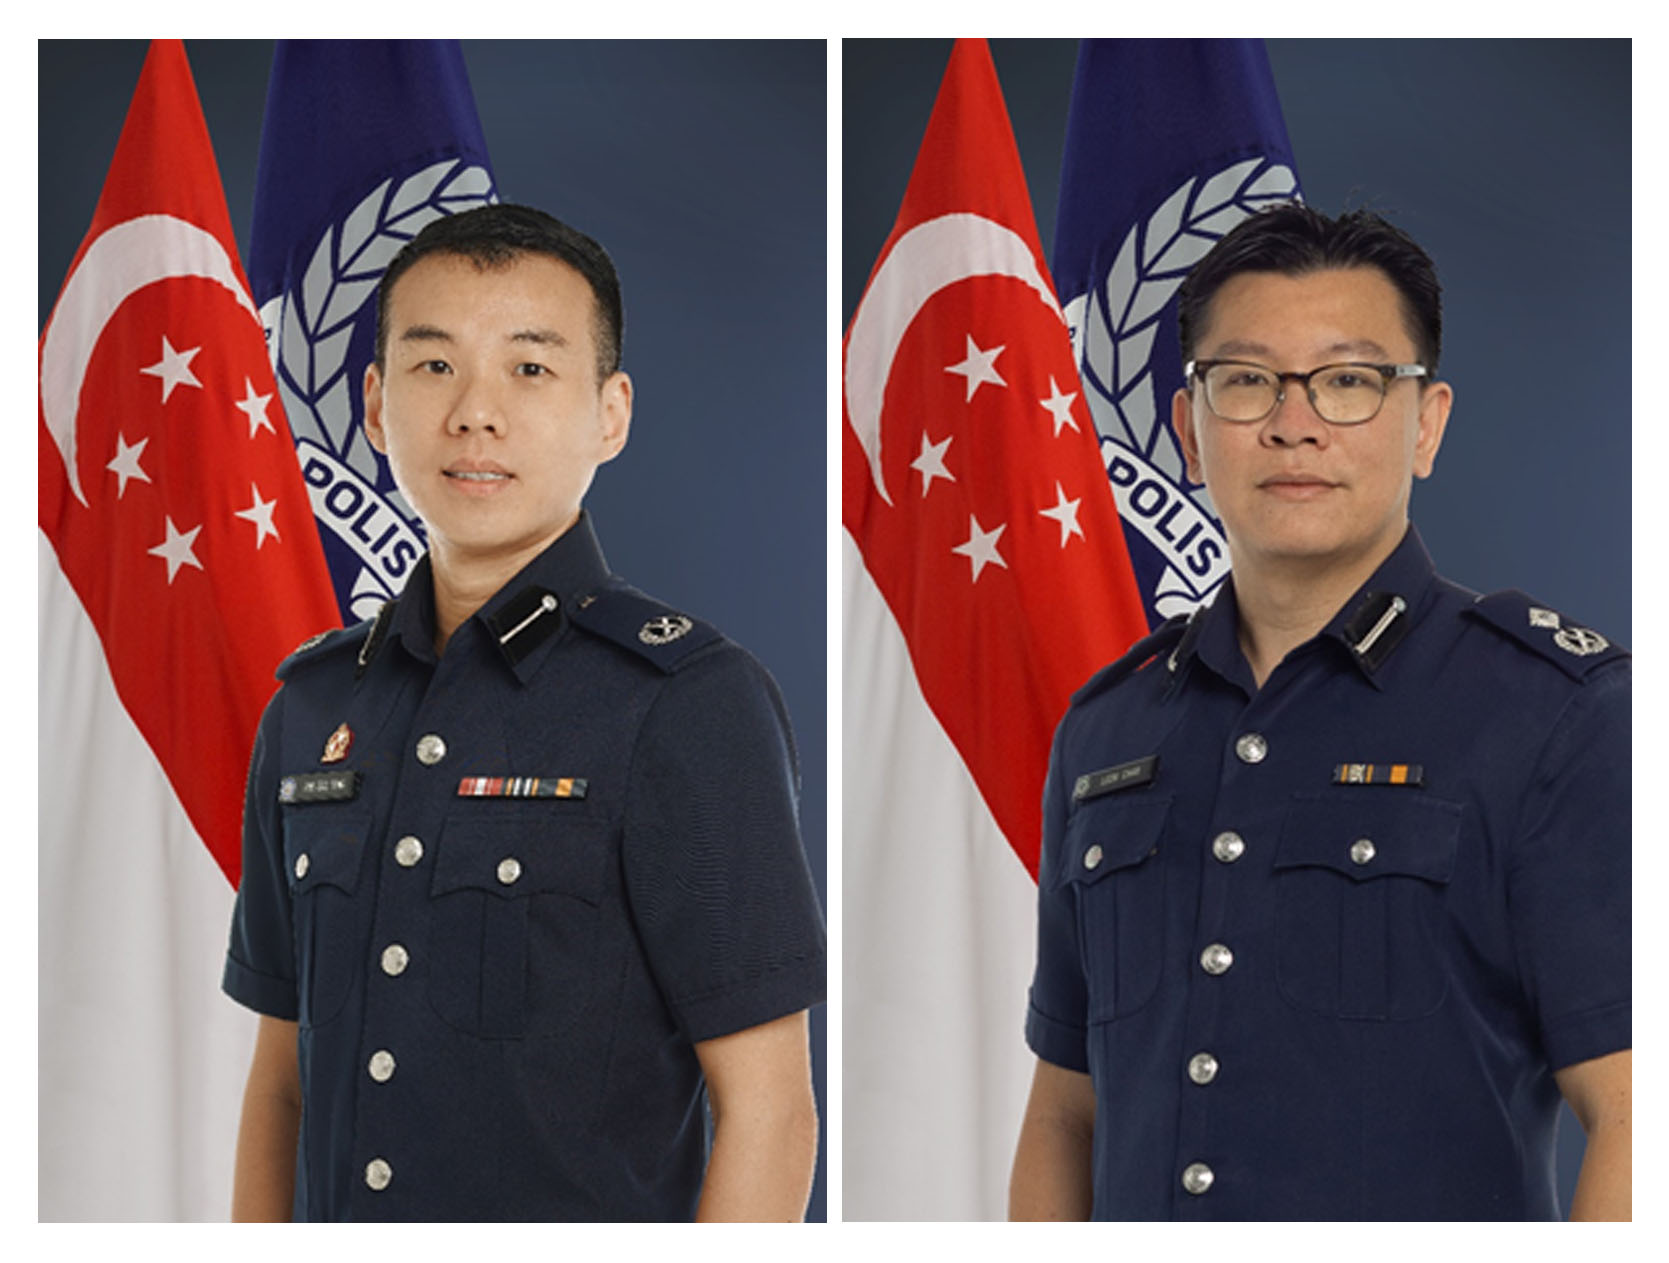 Change Of Command At Woodlands Police Division